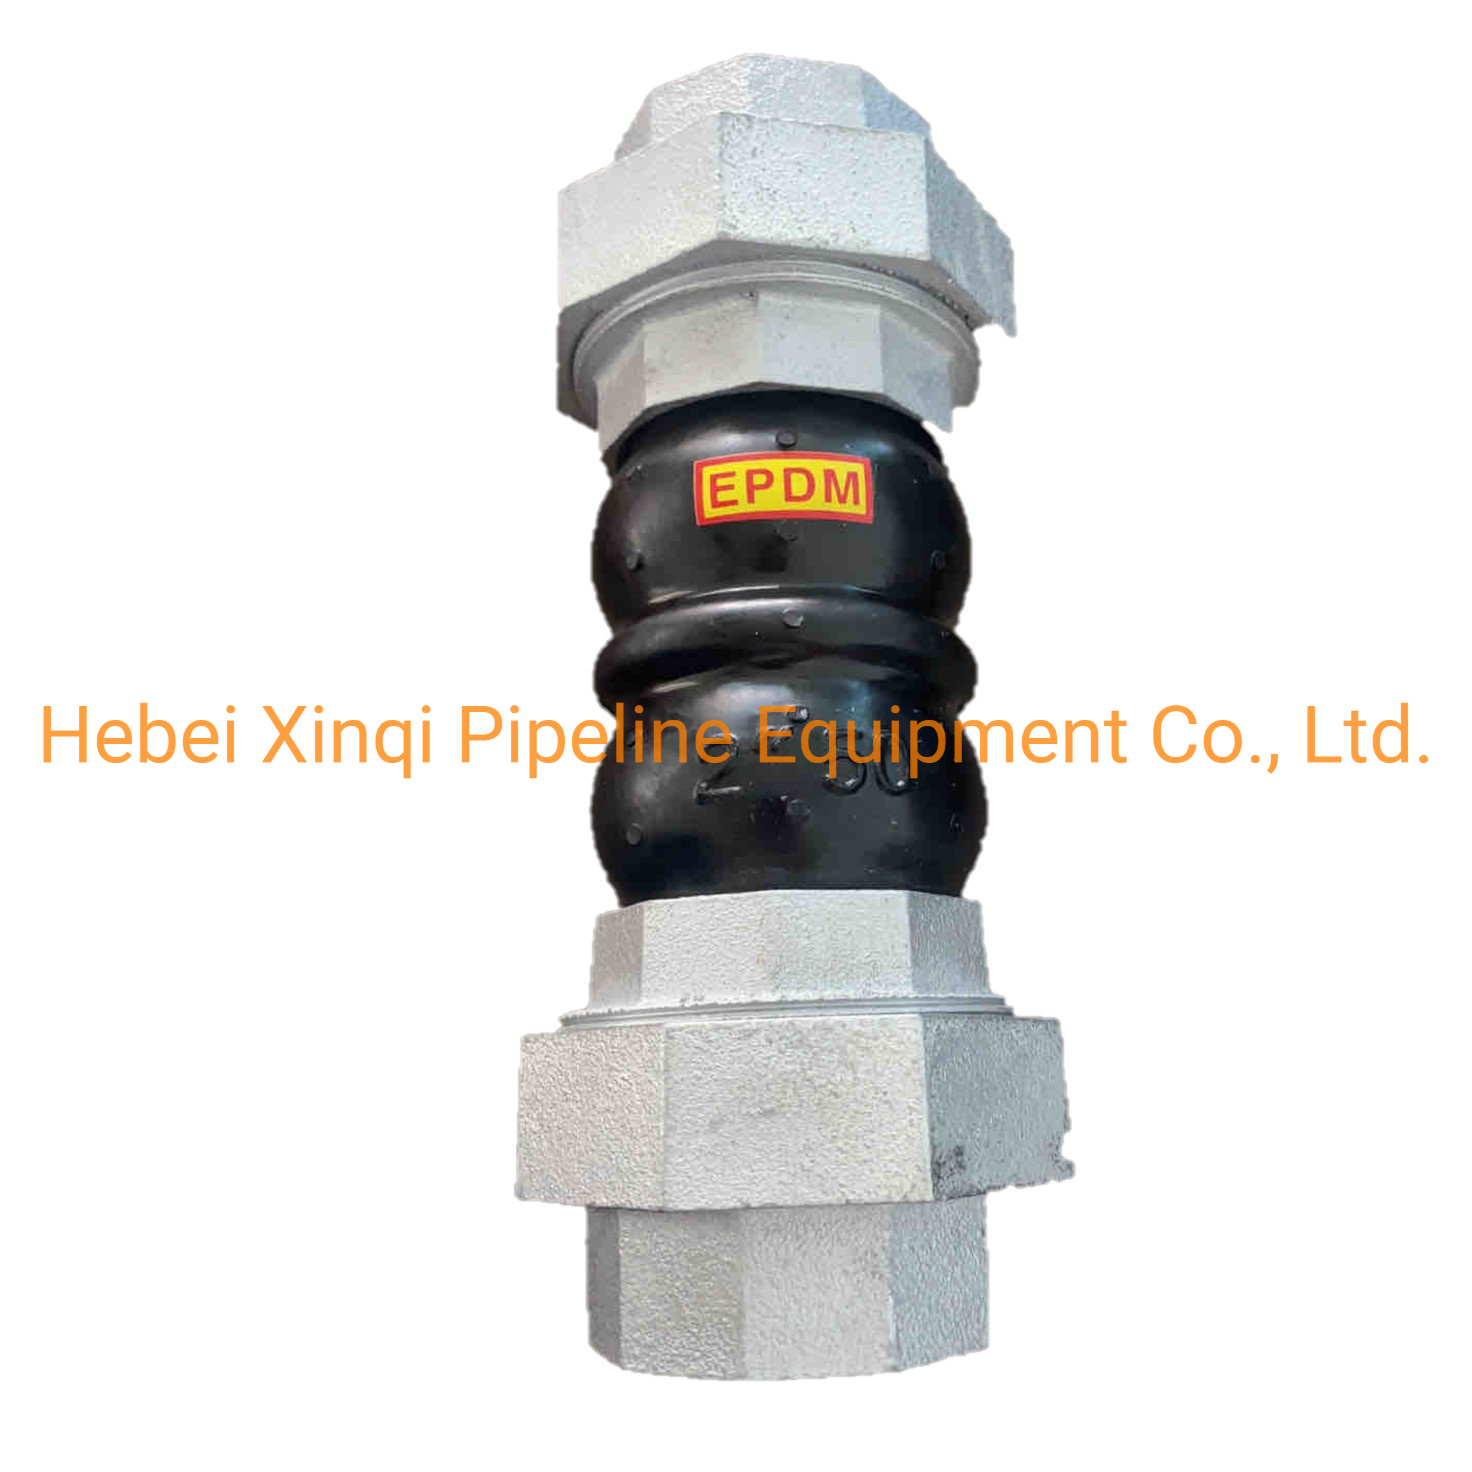 EPDM Rubber Flexible Joint Union Threaded Connection